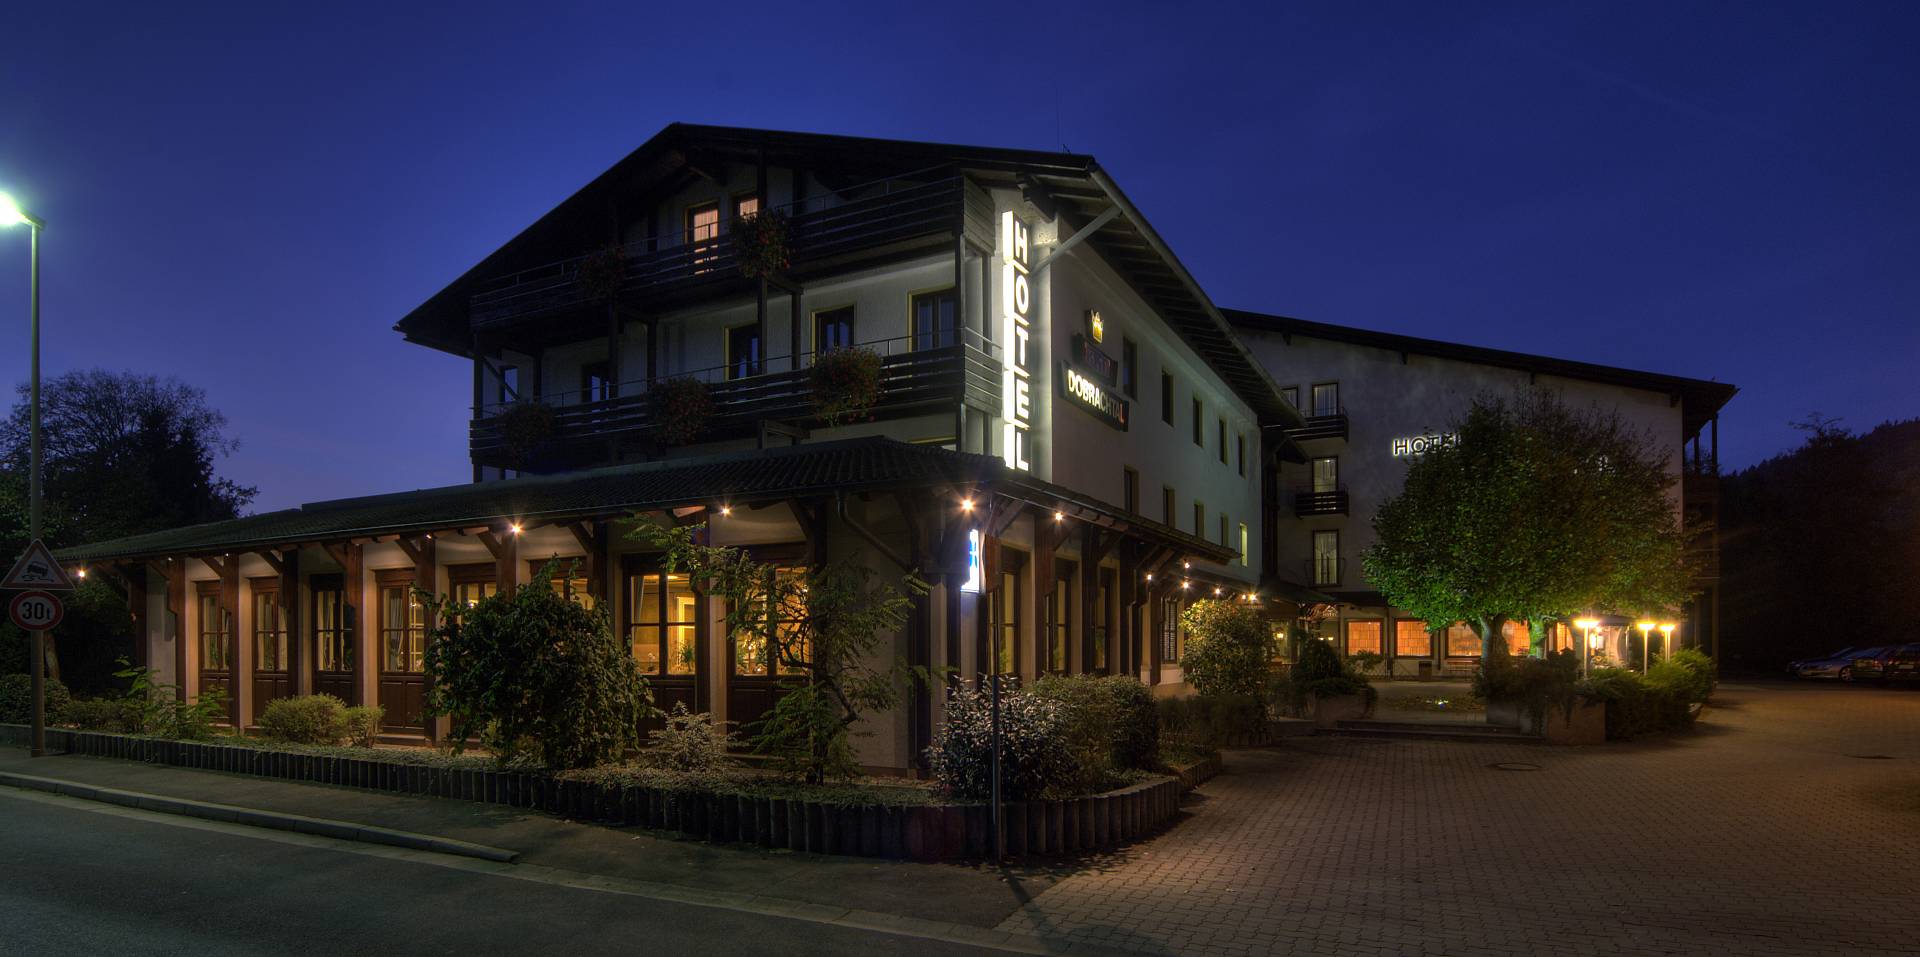 The hotel Dobrachtal at night with lighting